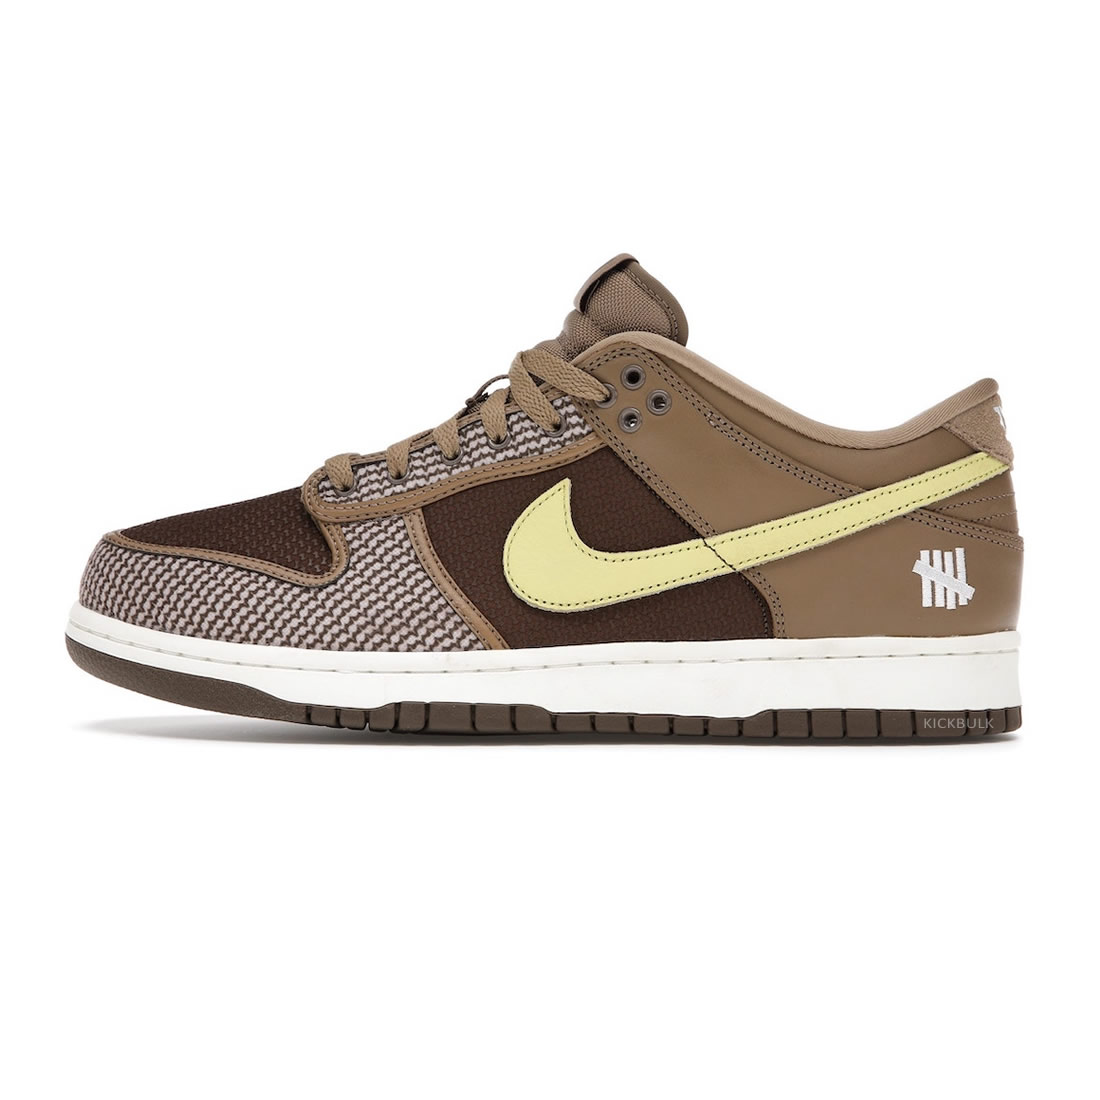 Undefeated Nike Dunk Low Sp Canteen Dh3061 200 1 - kickbulk.org